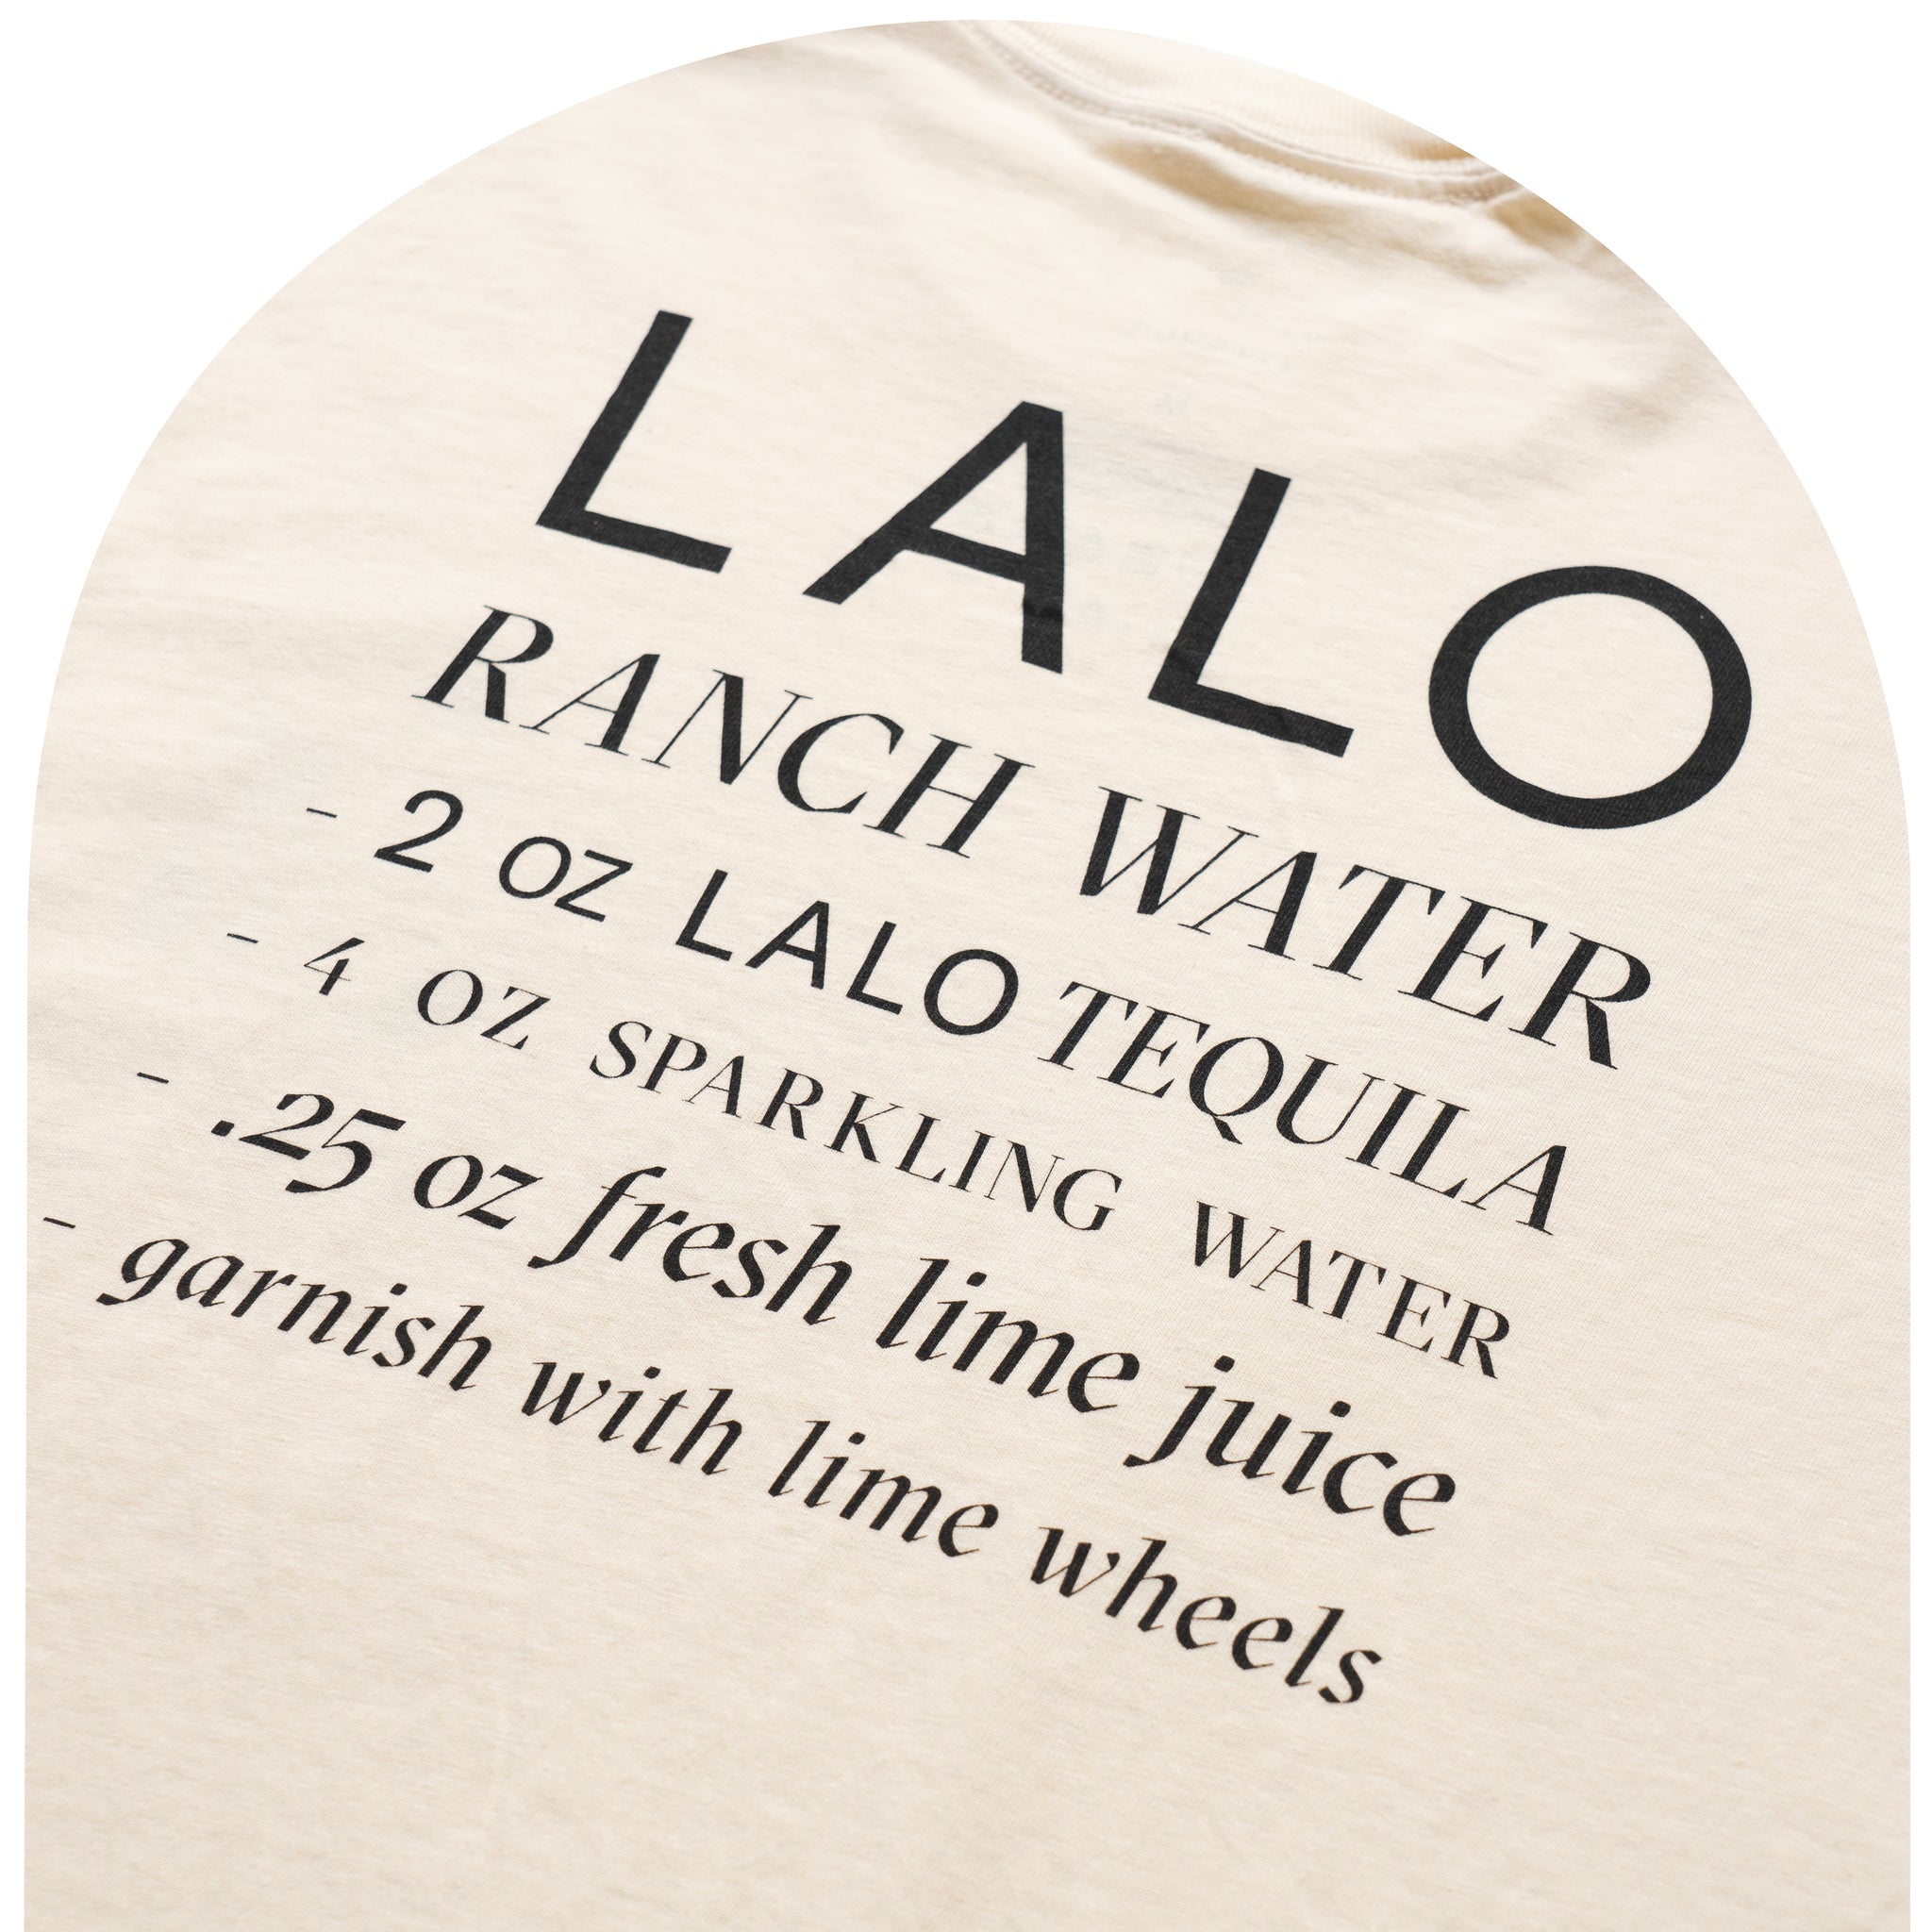 Ranch Water Tee